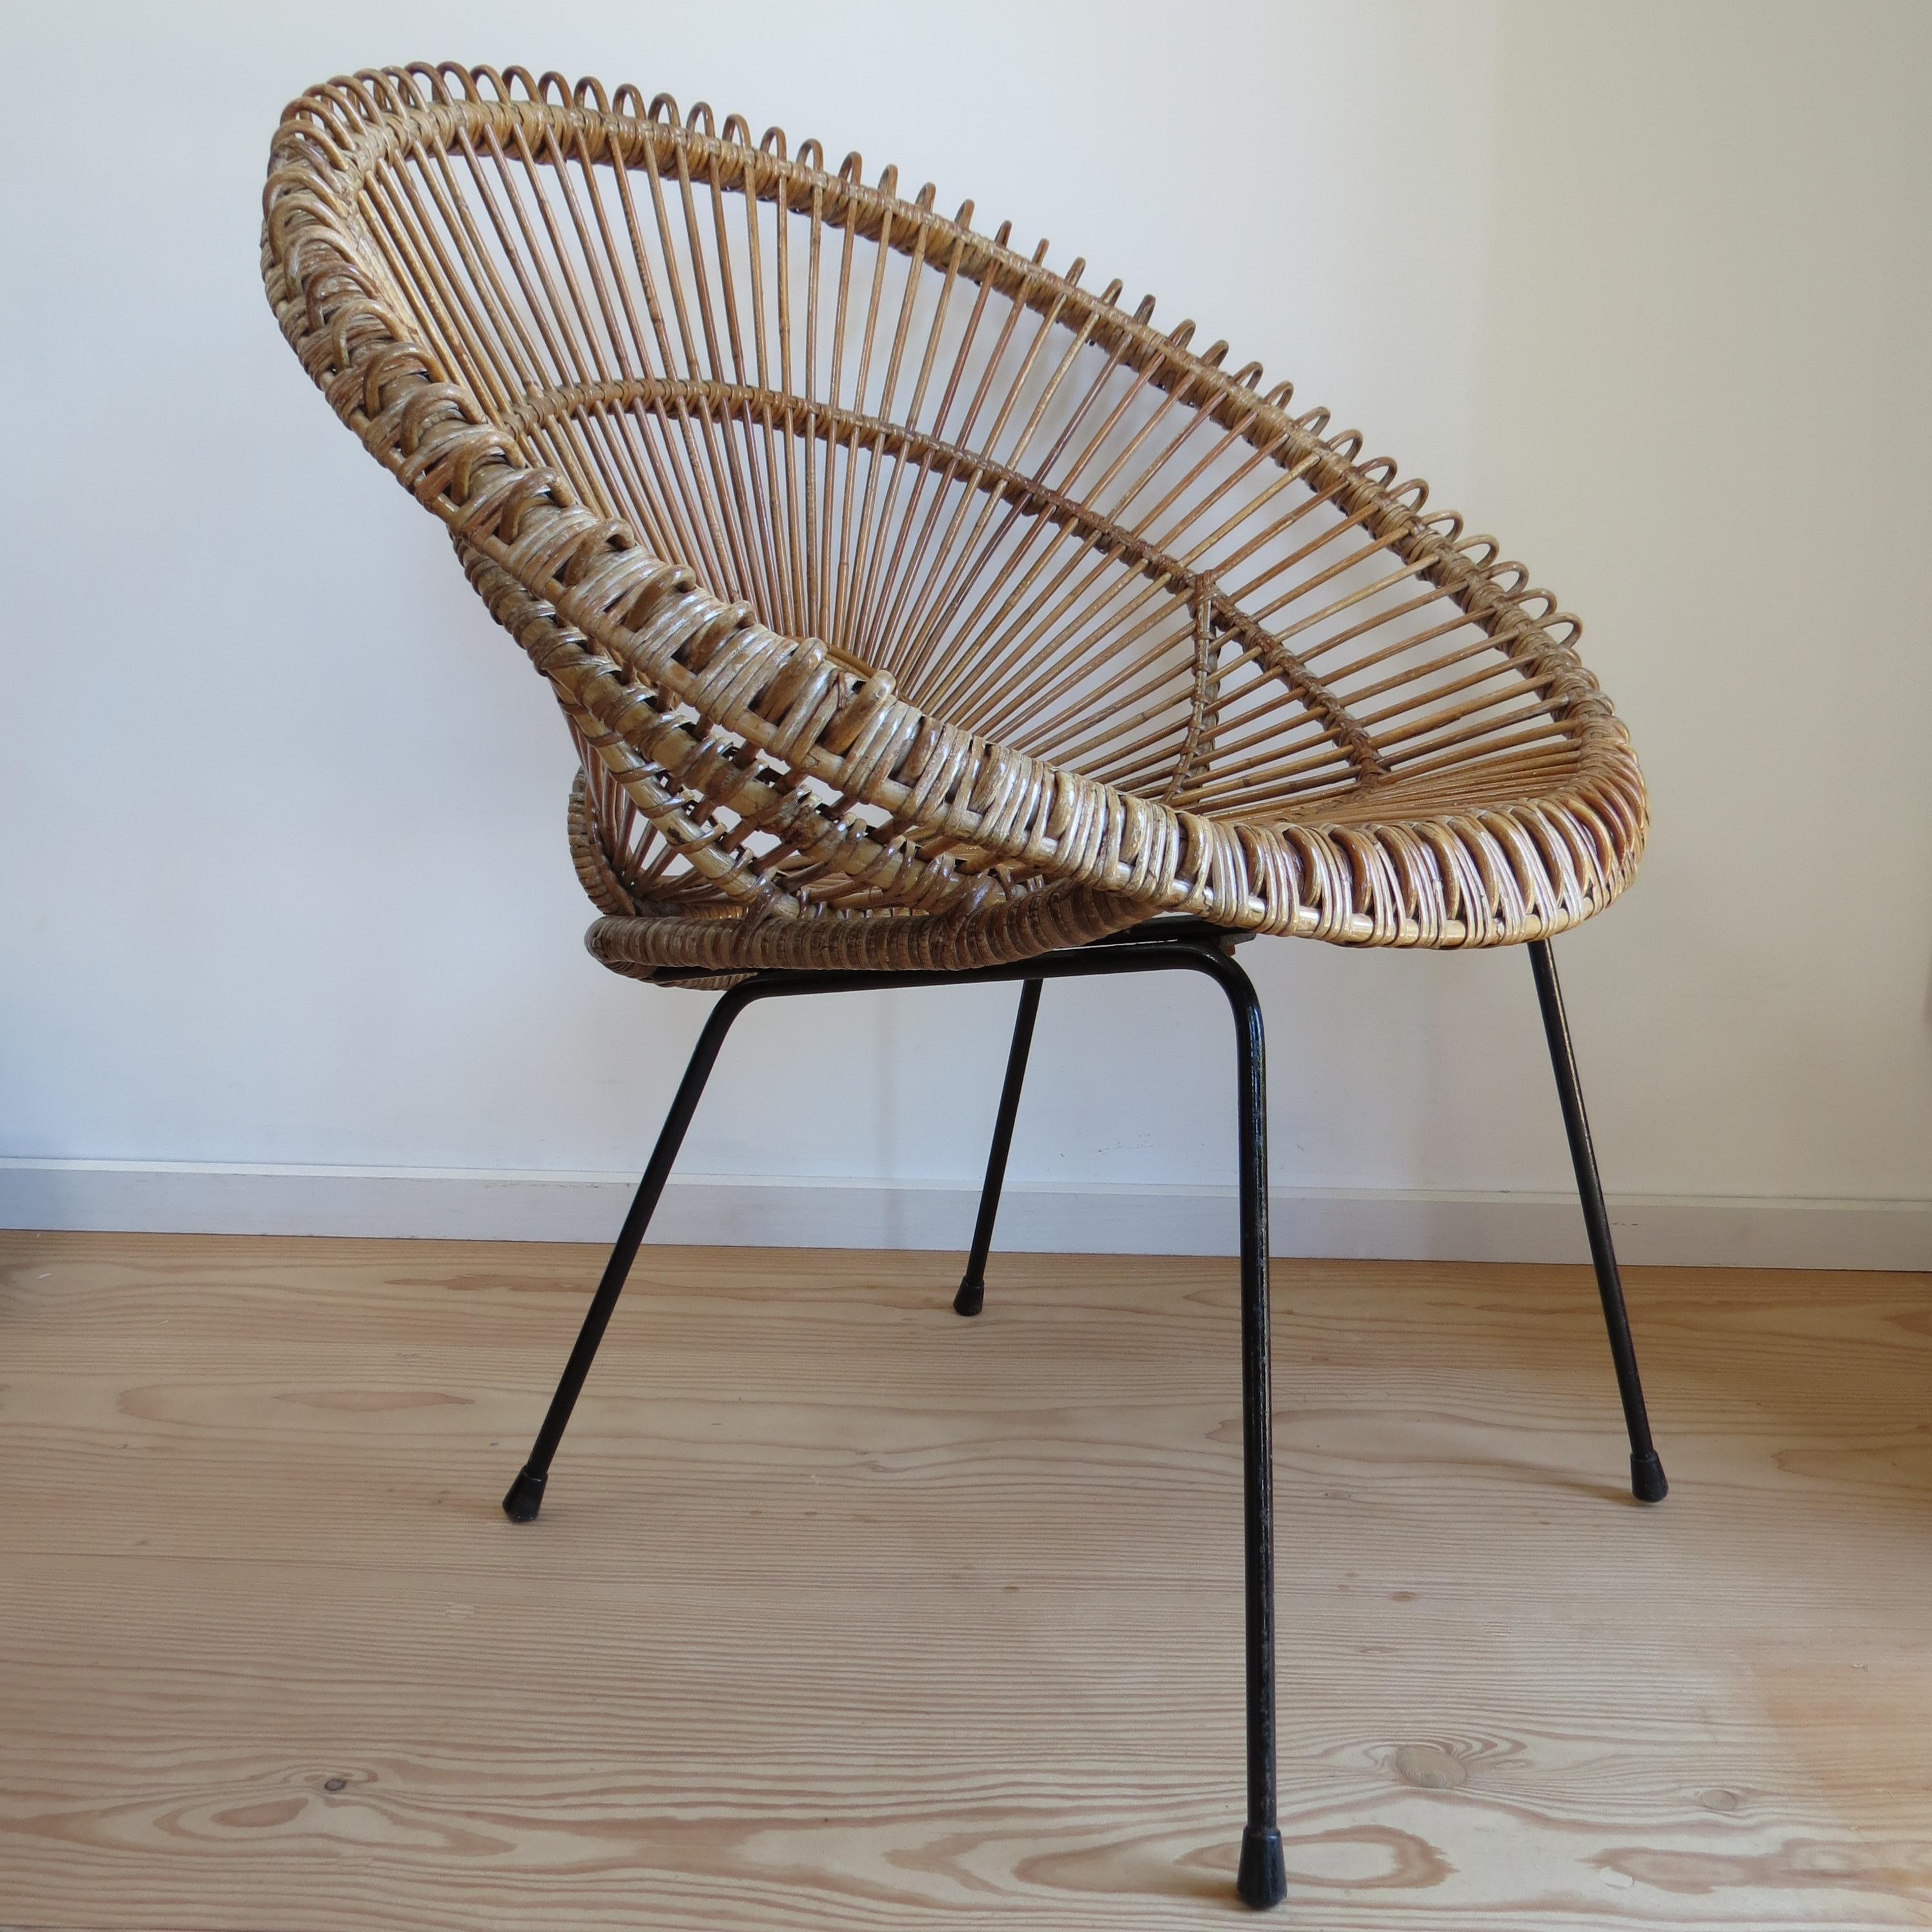 1950s Rattan Cane and Metal Chair Franco Albini 2 available B In Good Condition For Sale In Stow on the Wold, GB